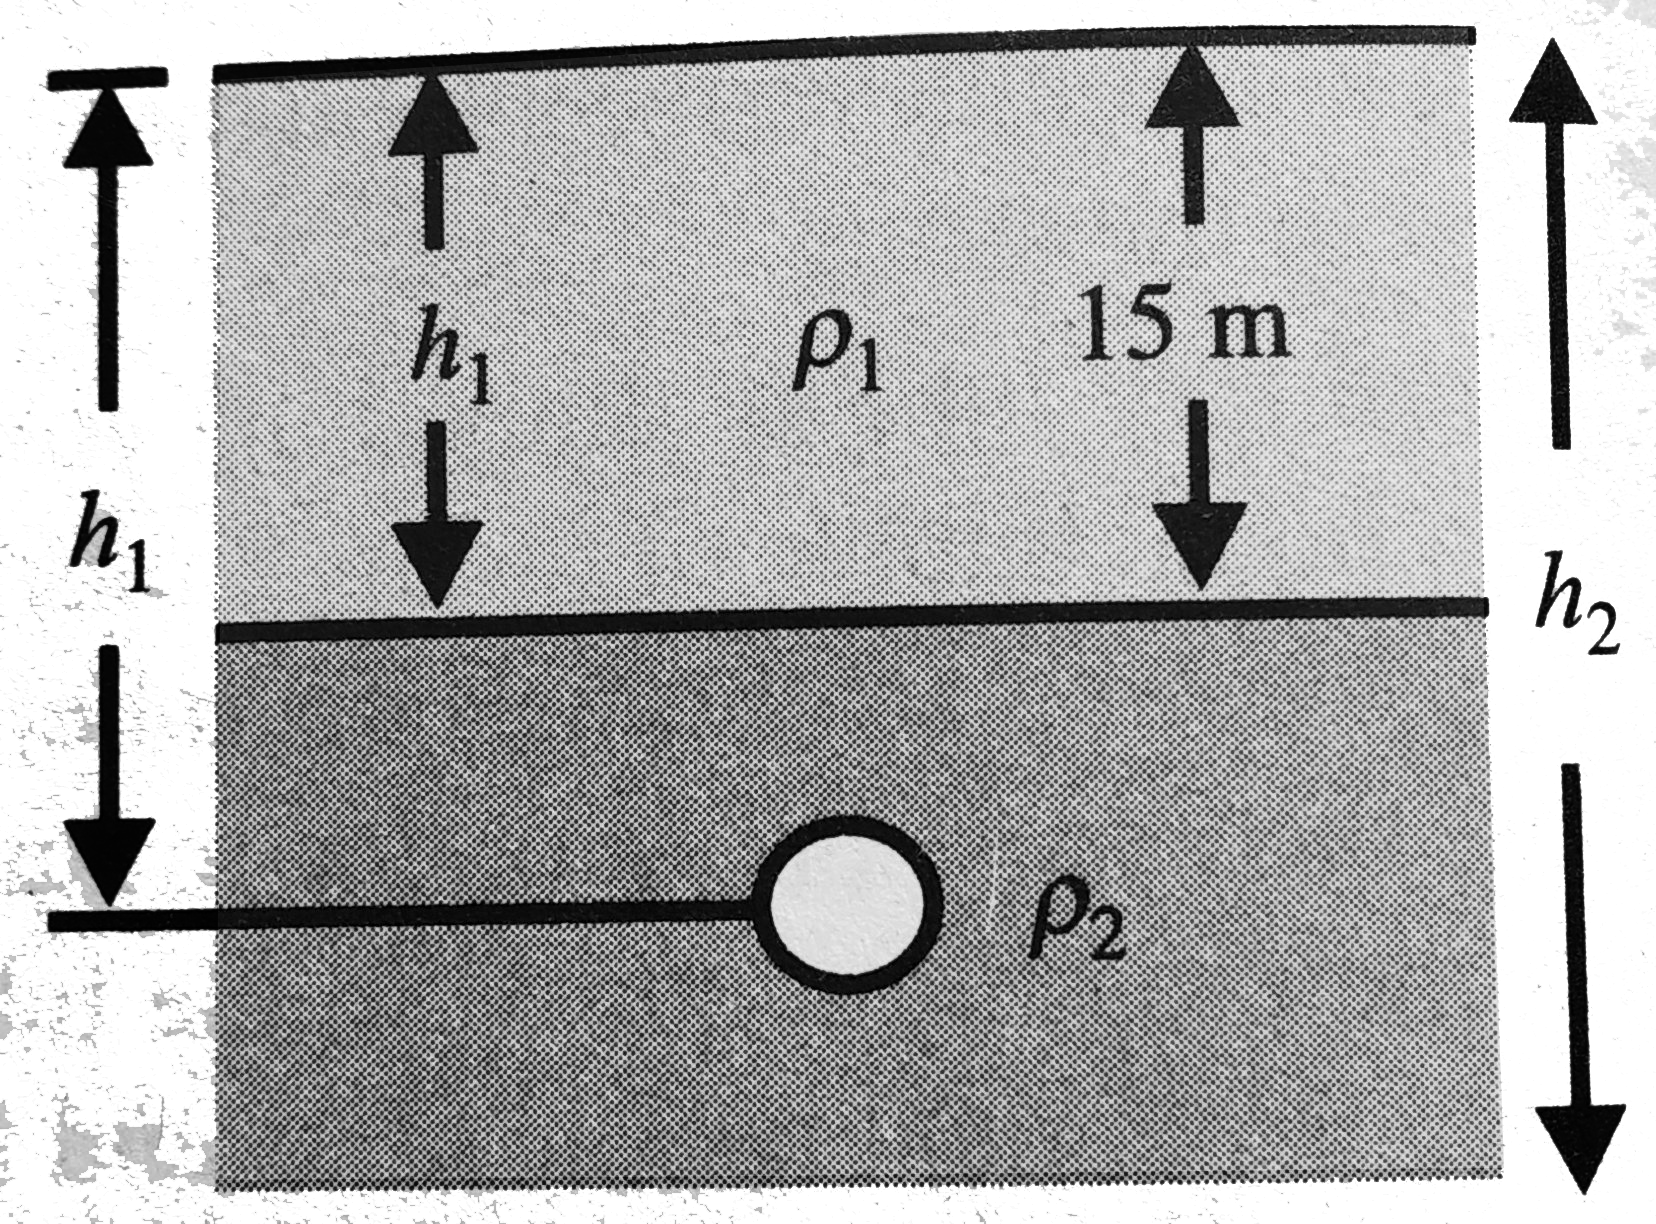 Calculate the pressure indise a small air bubble of radius 0.01 mm situated at a depth of h=20 m below the fre surface of liquid of density rho(1)=10^(3)kg//m^(3), rho(2)=800km//m^(3) and surface tension T(2)=7.5xx10^(-2)N//m. The thickness of the first liqid is h(1)=15 m and h(2)=25m.